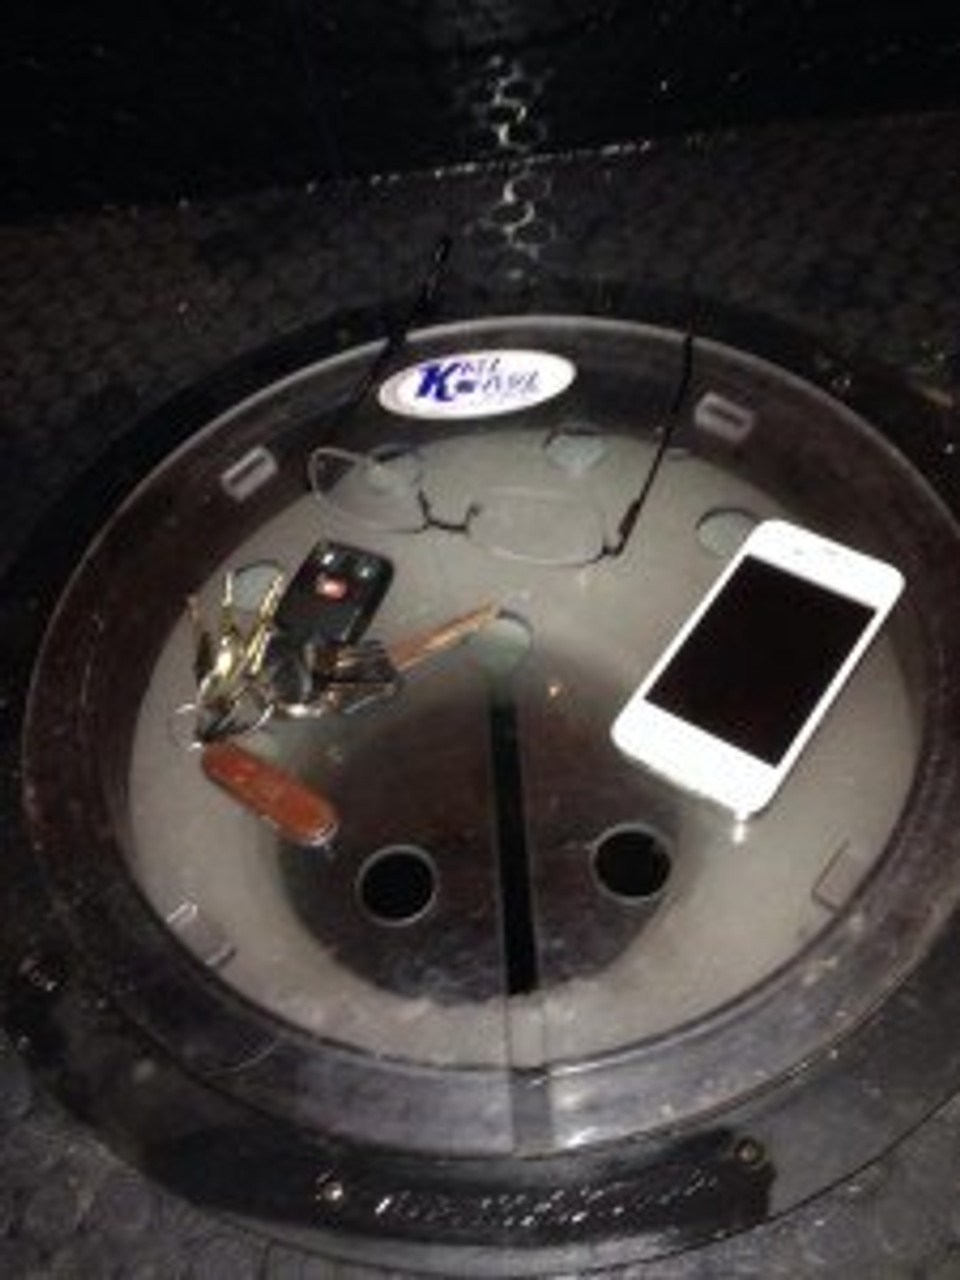 katz kovers for FISH HOLE BUDDY ONLY PRODUCTS protect your valuables from going down the hole